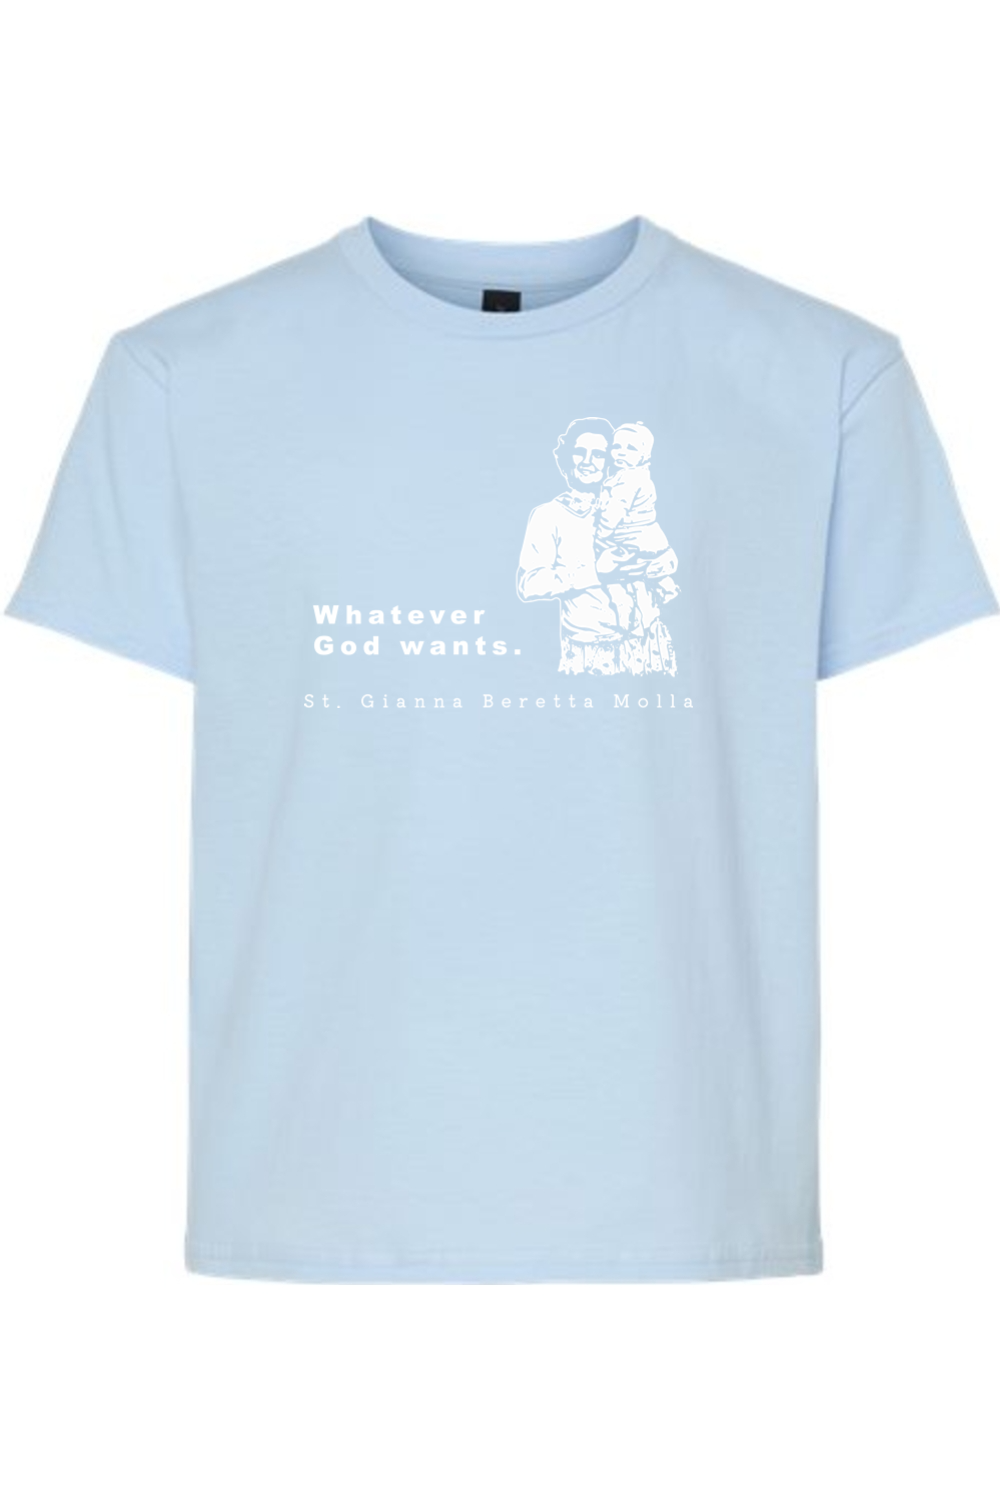 Whatever God Wants - St. Gianna Molla Youth T-Shirt